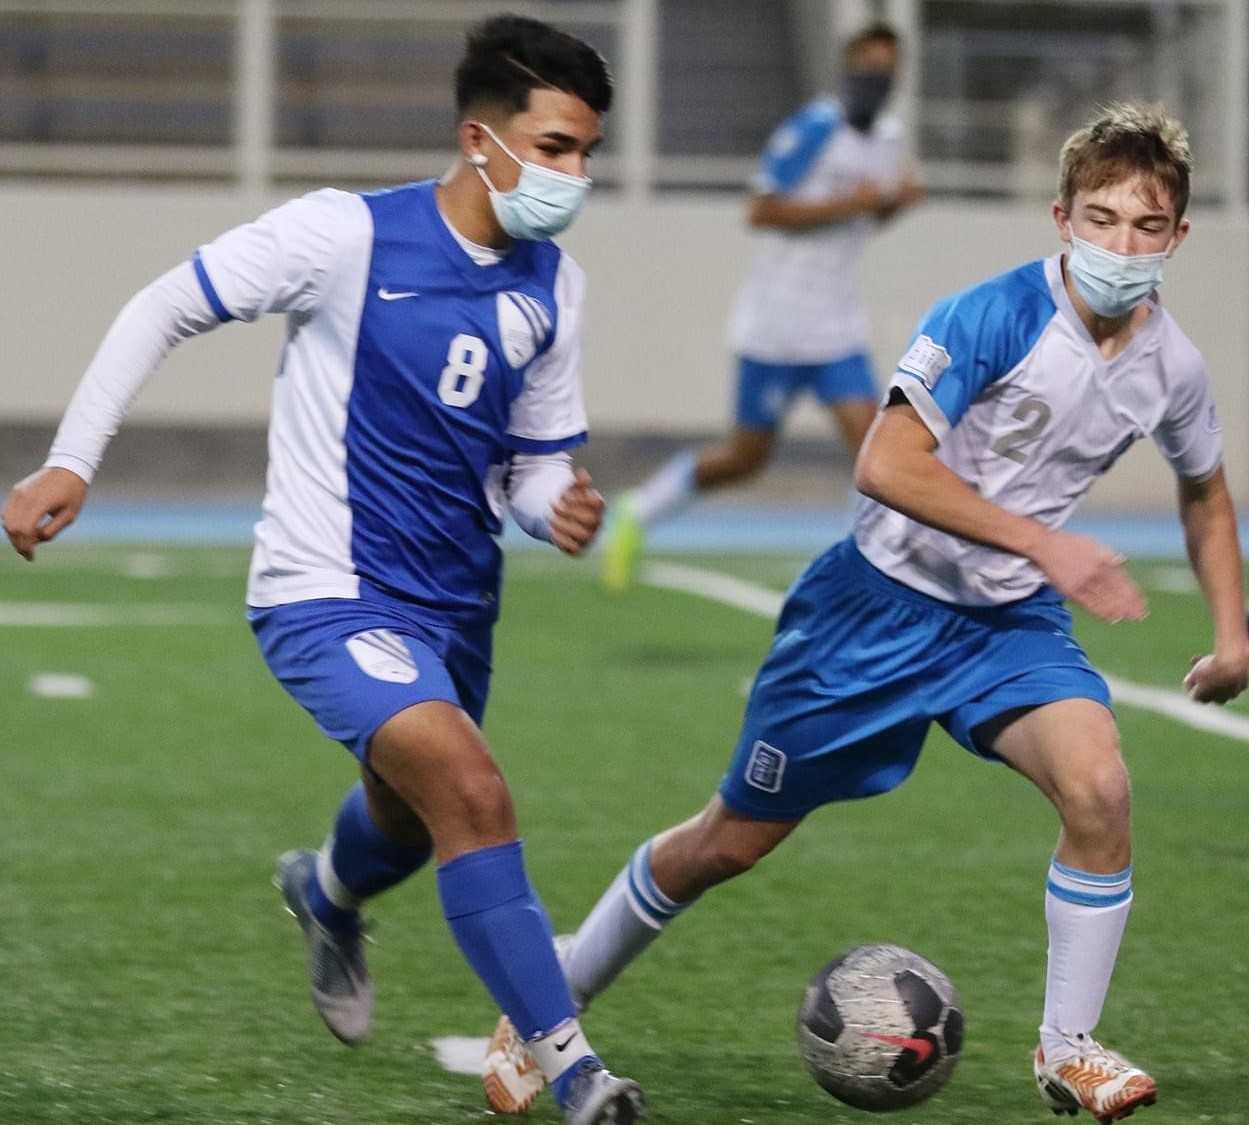 South Medford's Eloy Saucedo (8) works against pressure from Hidden Valley's Jake Saunders (2). (Photo by Tom Lavine)